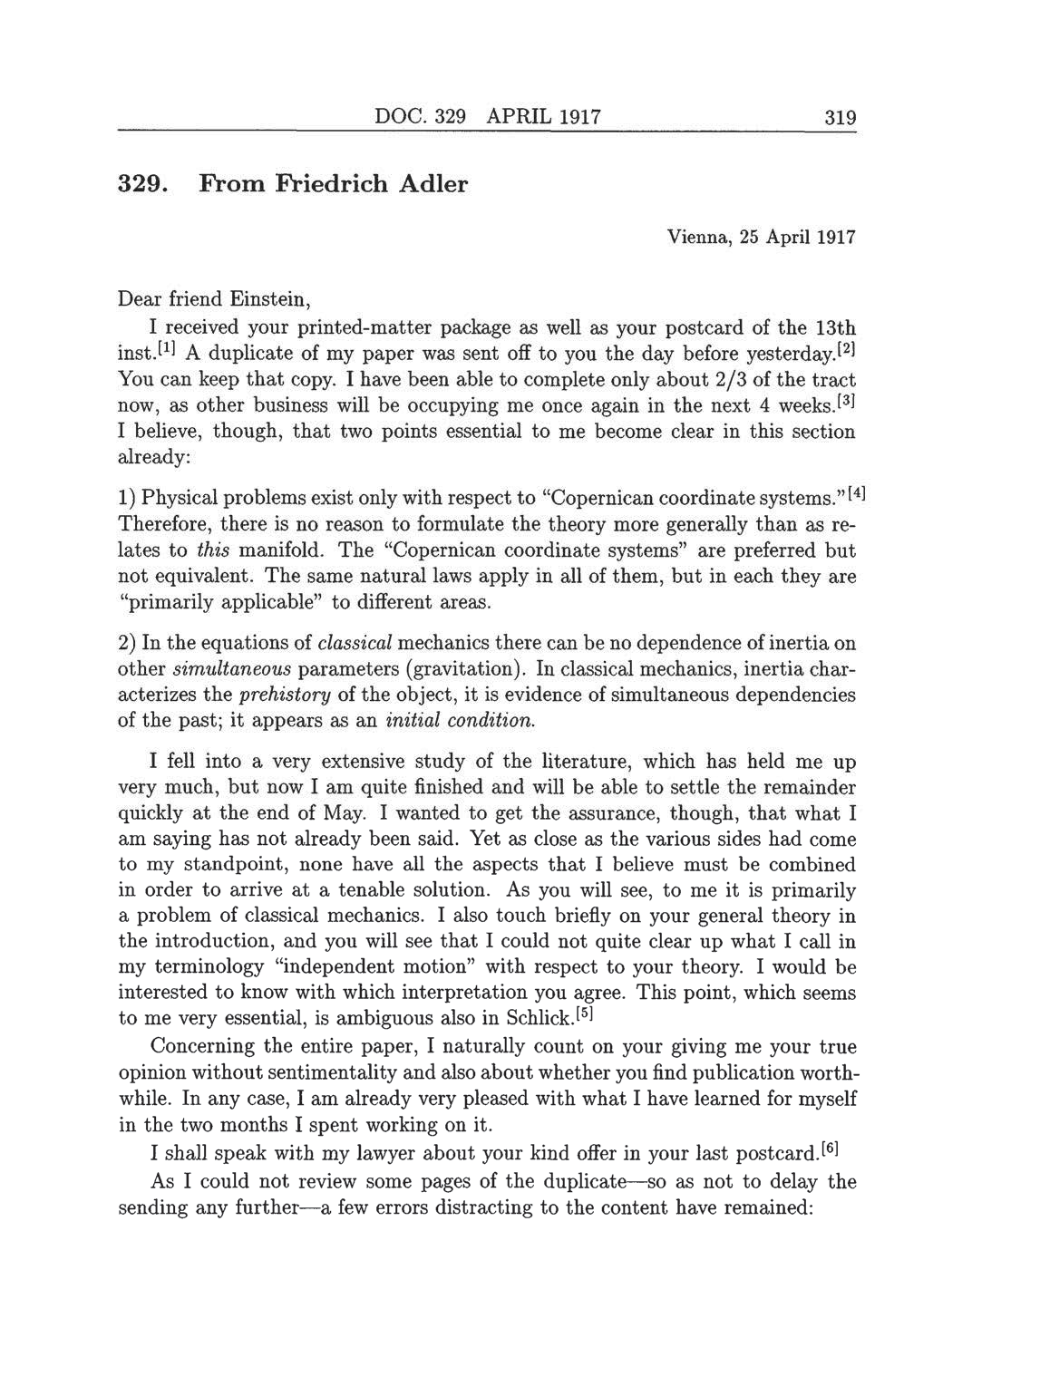 Volume 8: The Berlin Years: Correspondence, 1914-1918 (English translation supplement) page 319